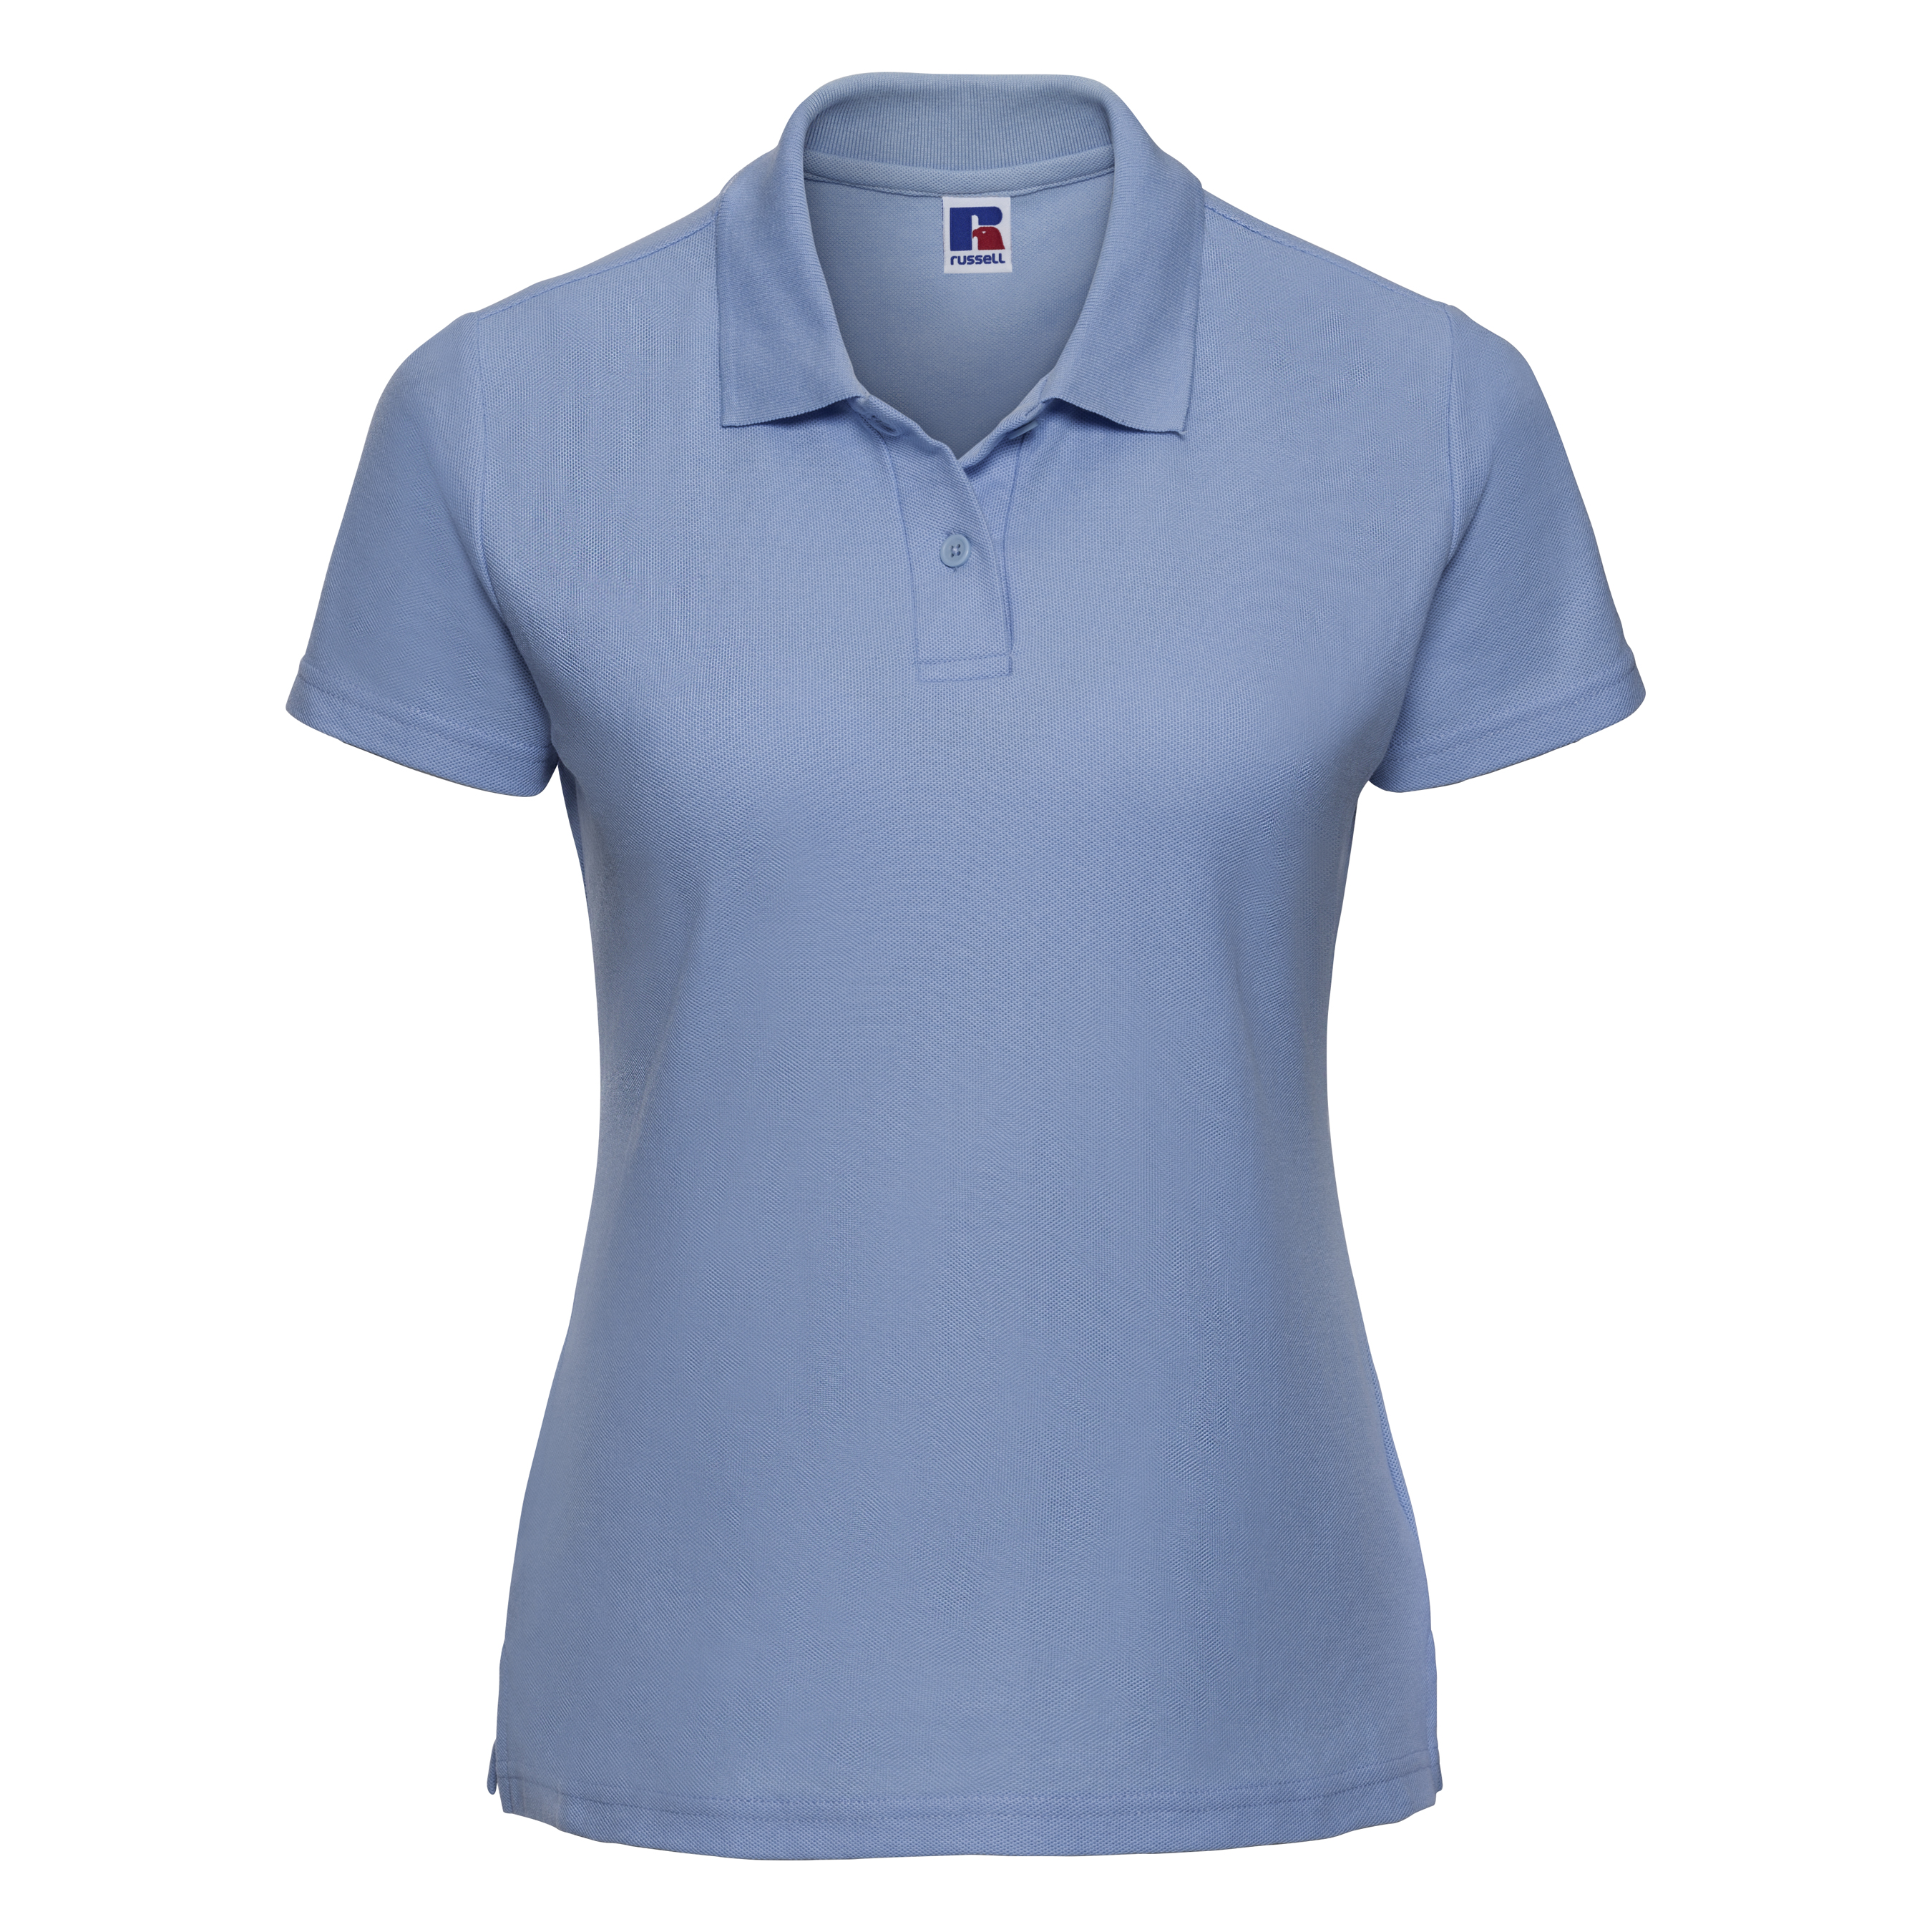 ax-httpswebsystems.s3.amazonaws.comtmp_for_downloadrussell-womens-polycotton-sky.jpg